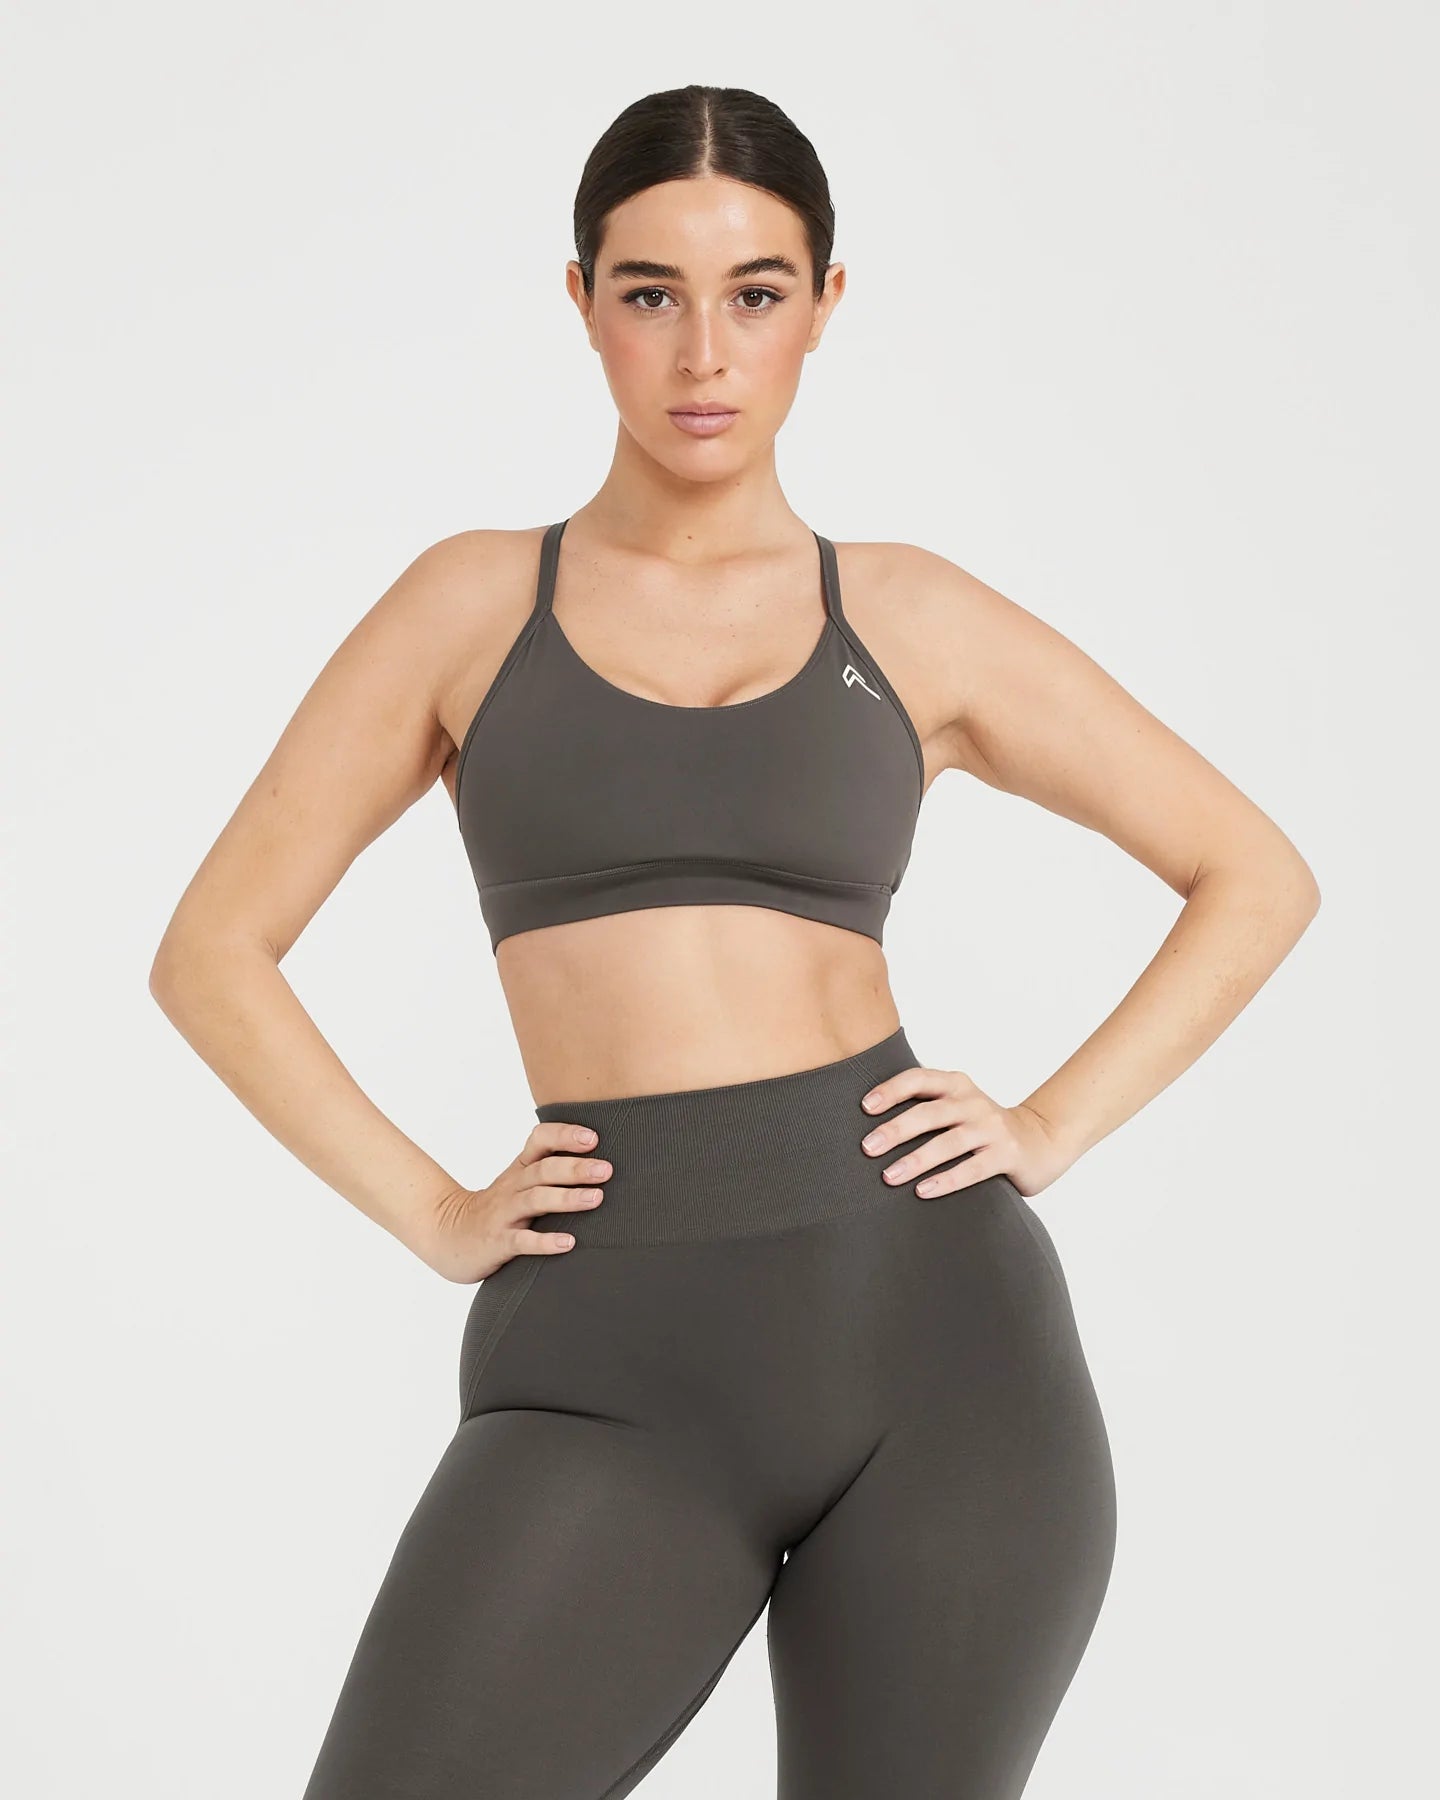 Barbed Wire Sports Bra - Sporty Chimp legging, workout gear & more